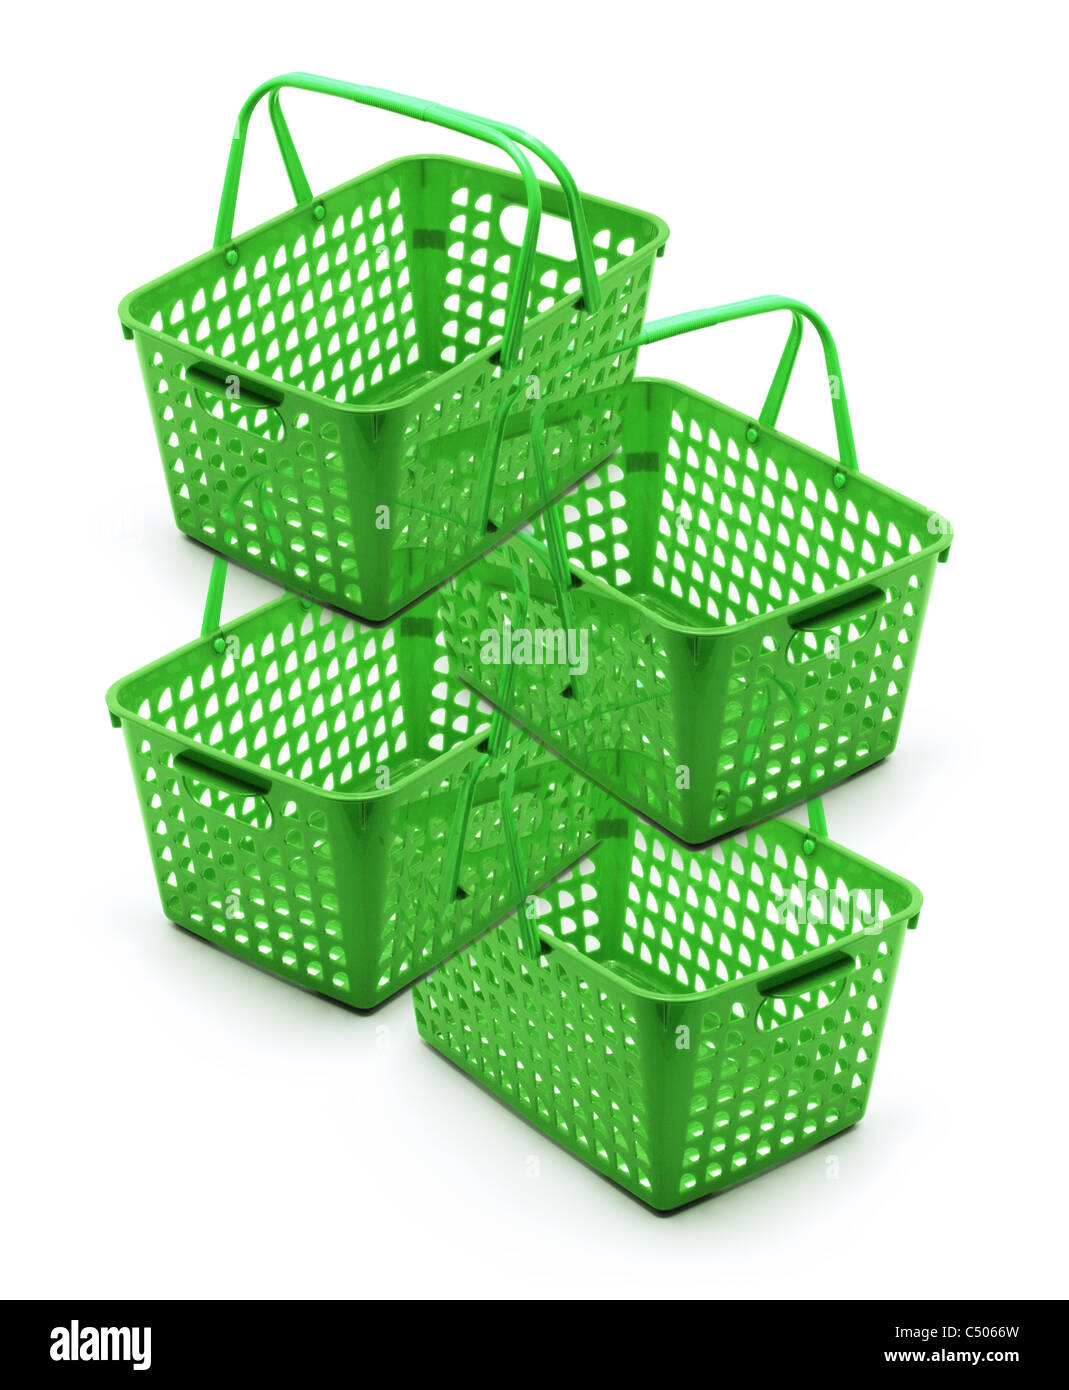 Stacked shopping baskets Cut Out Stock Images & Pictures - Alamy